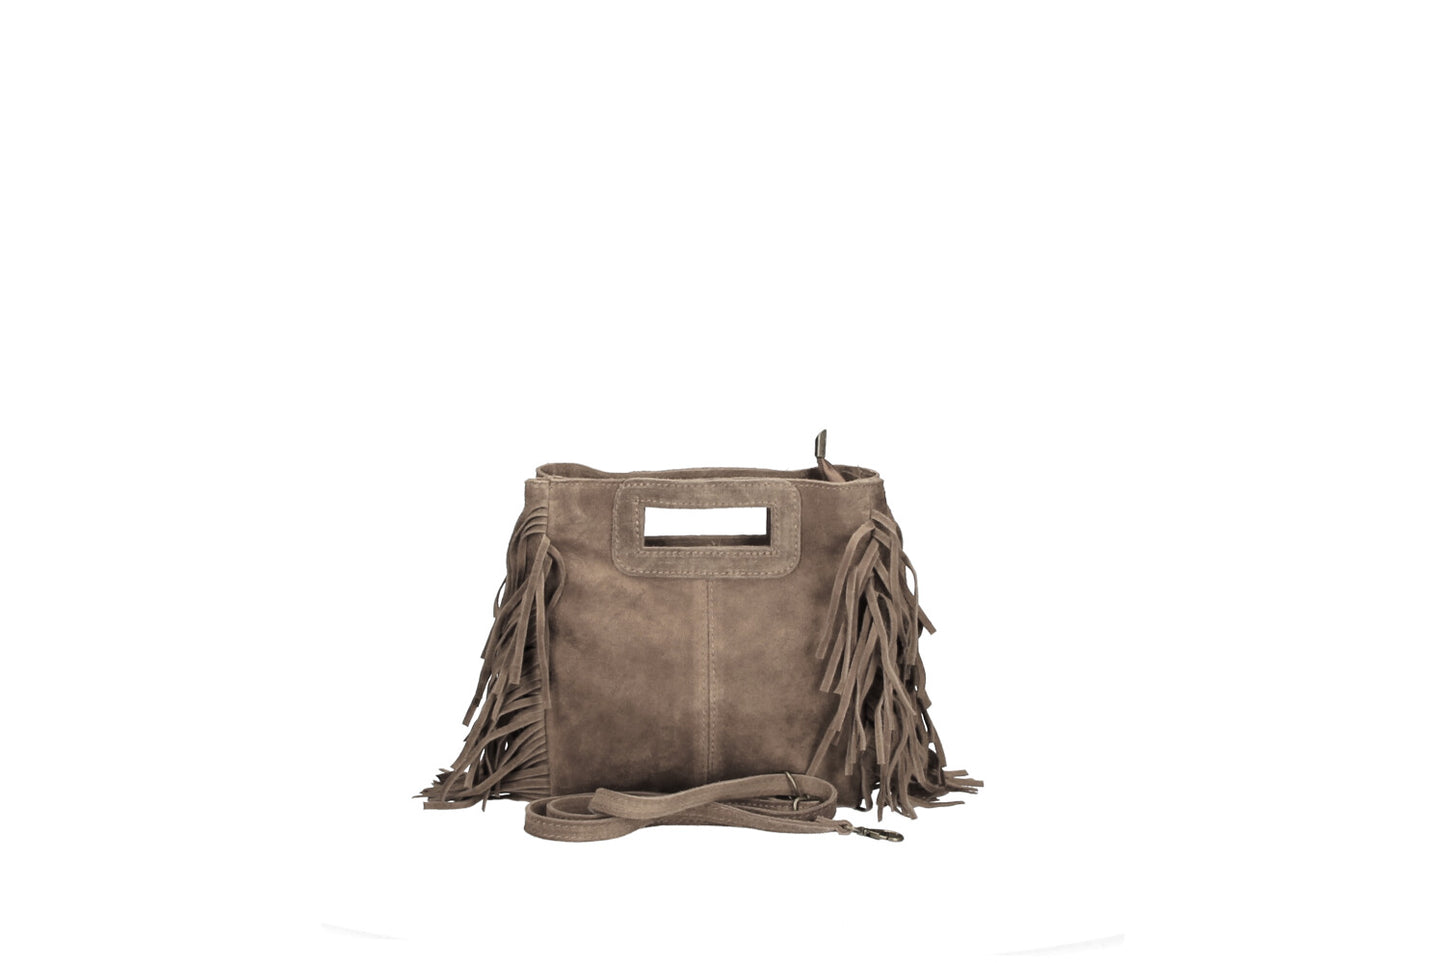 The Suede Fringed Square Bag